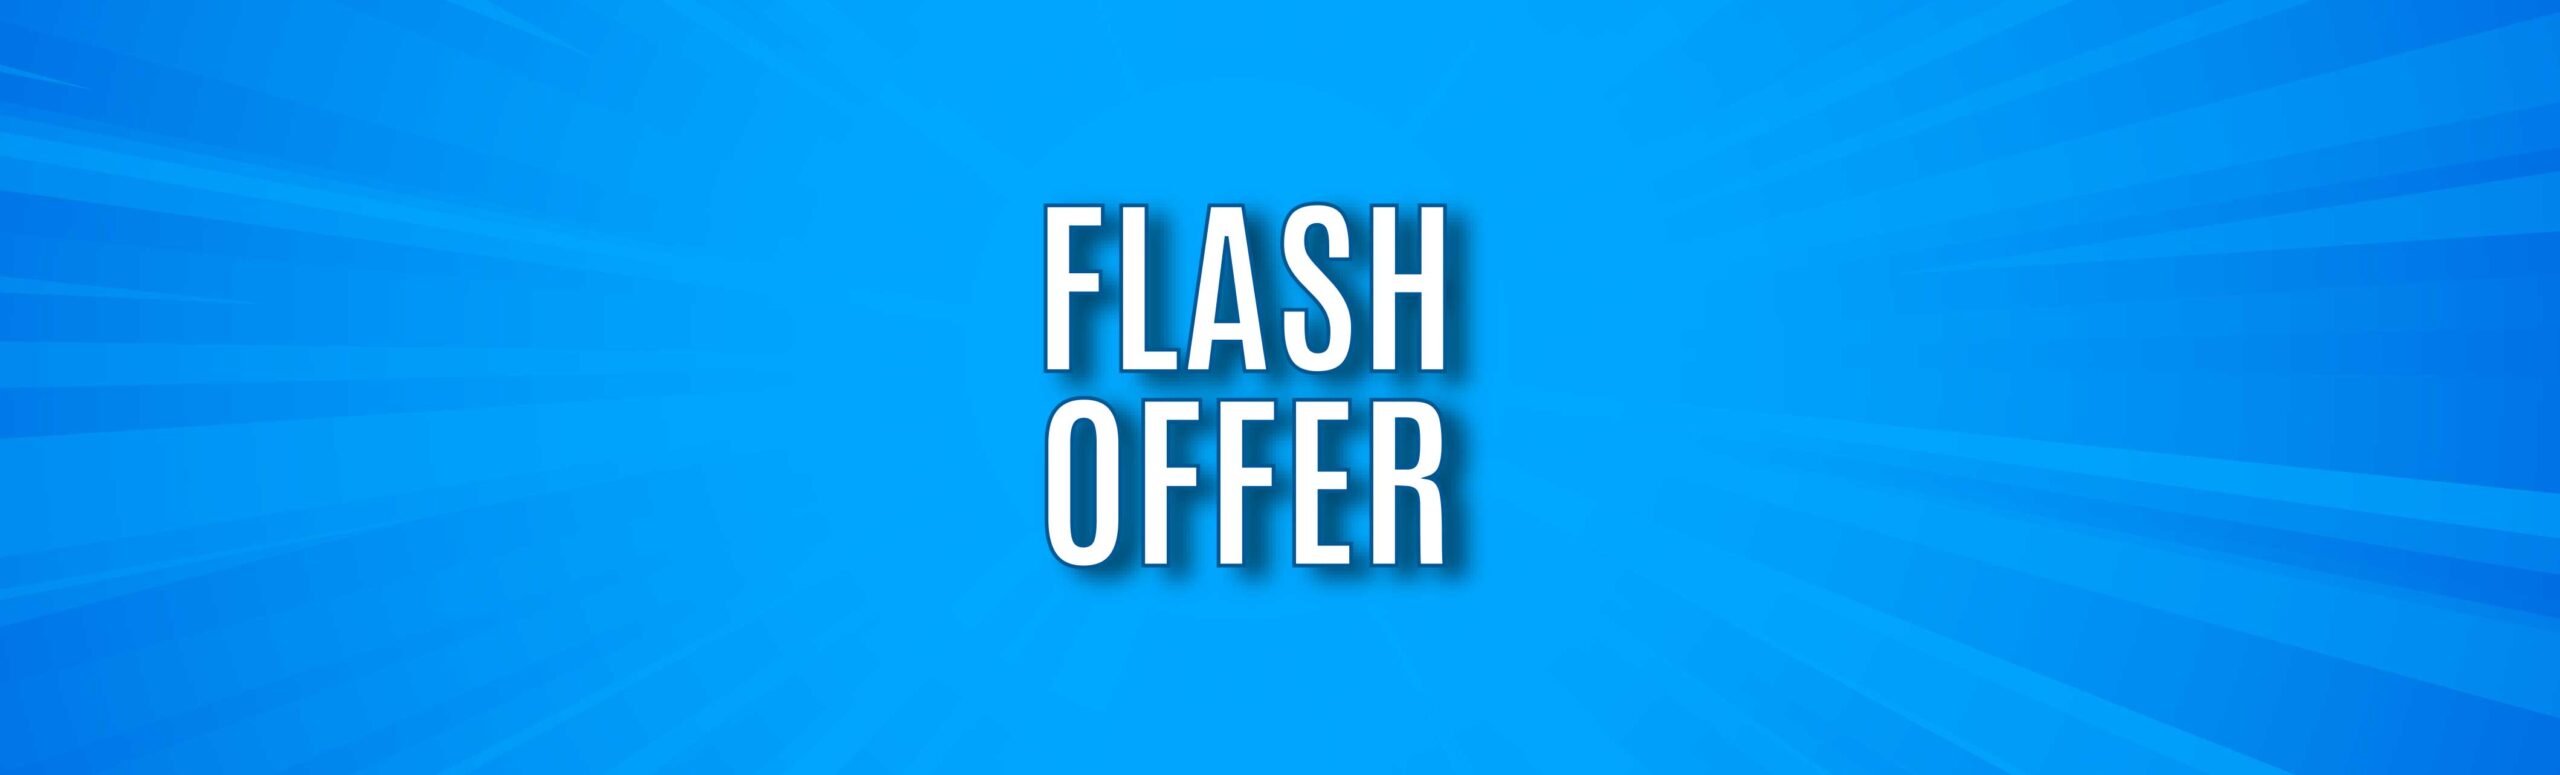 Flash offer with blue background mobile